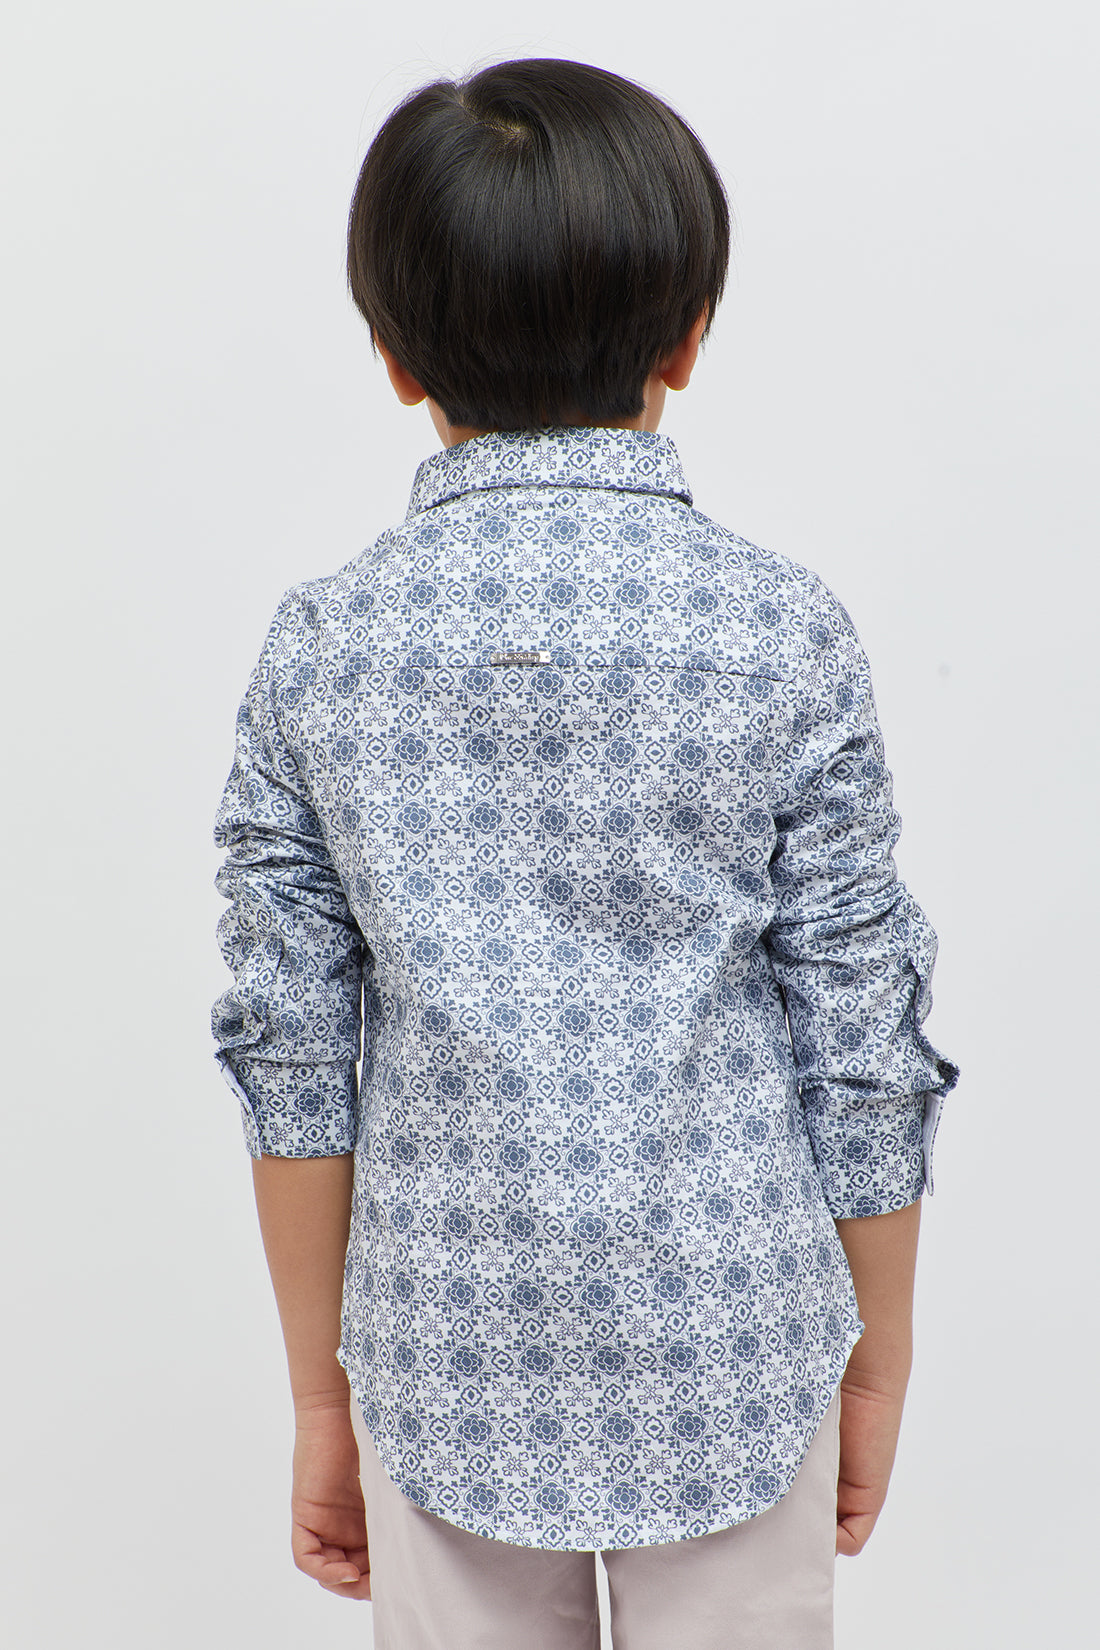 One Friday Formal Printed Blue Shirt